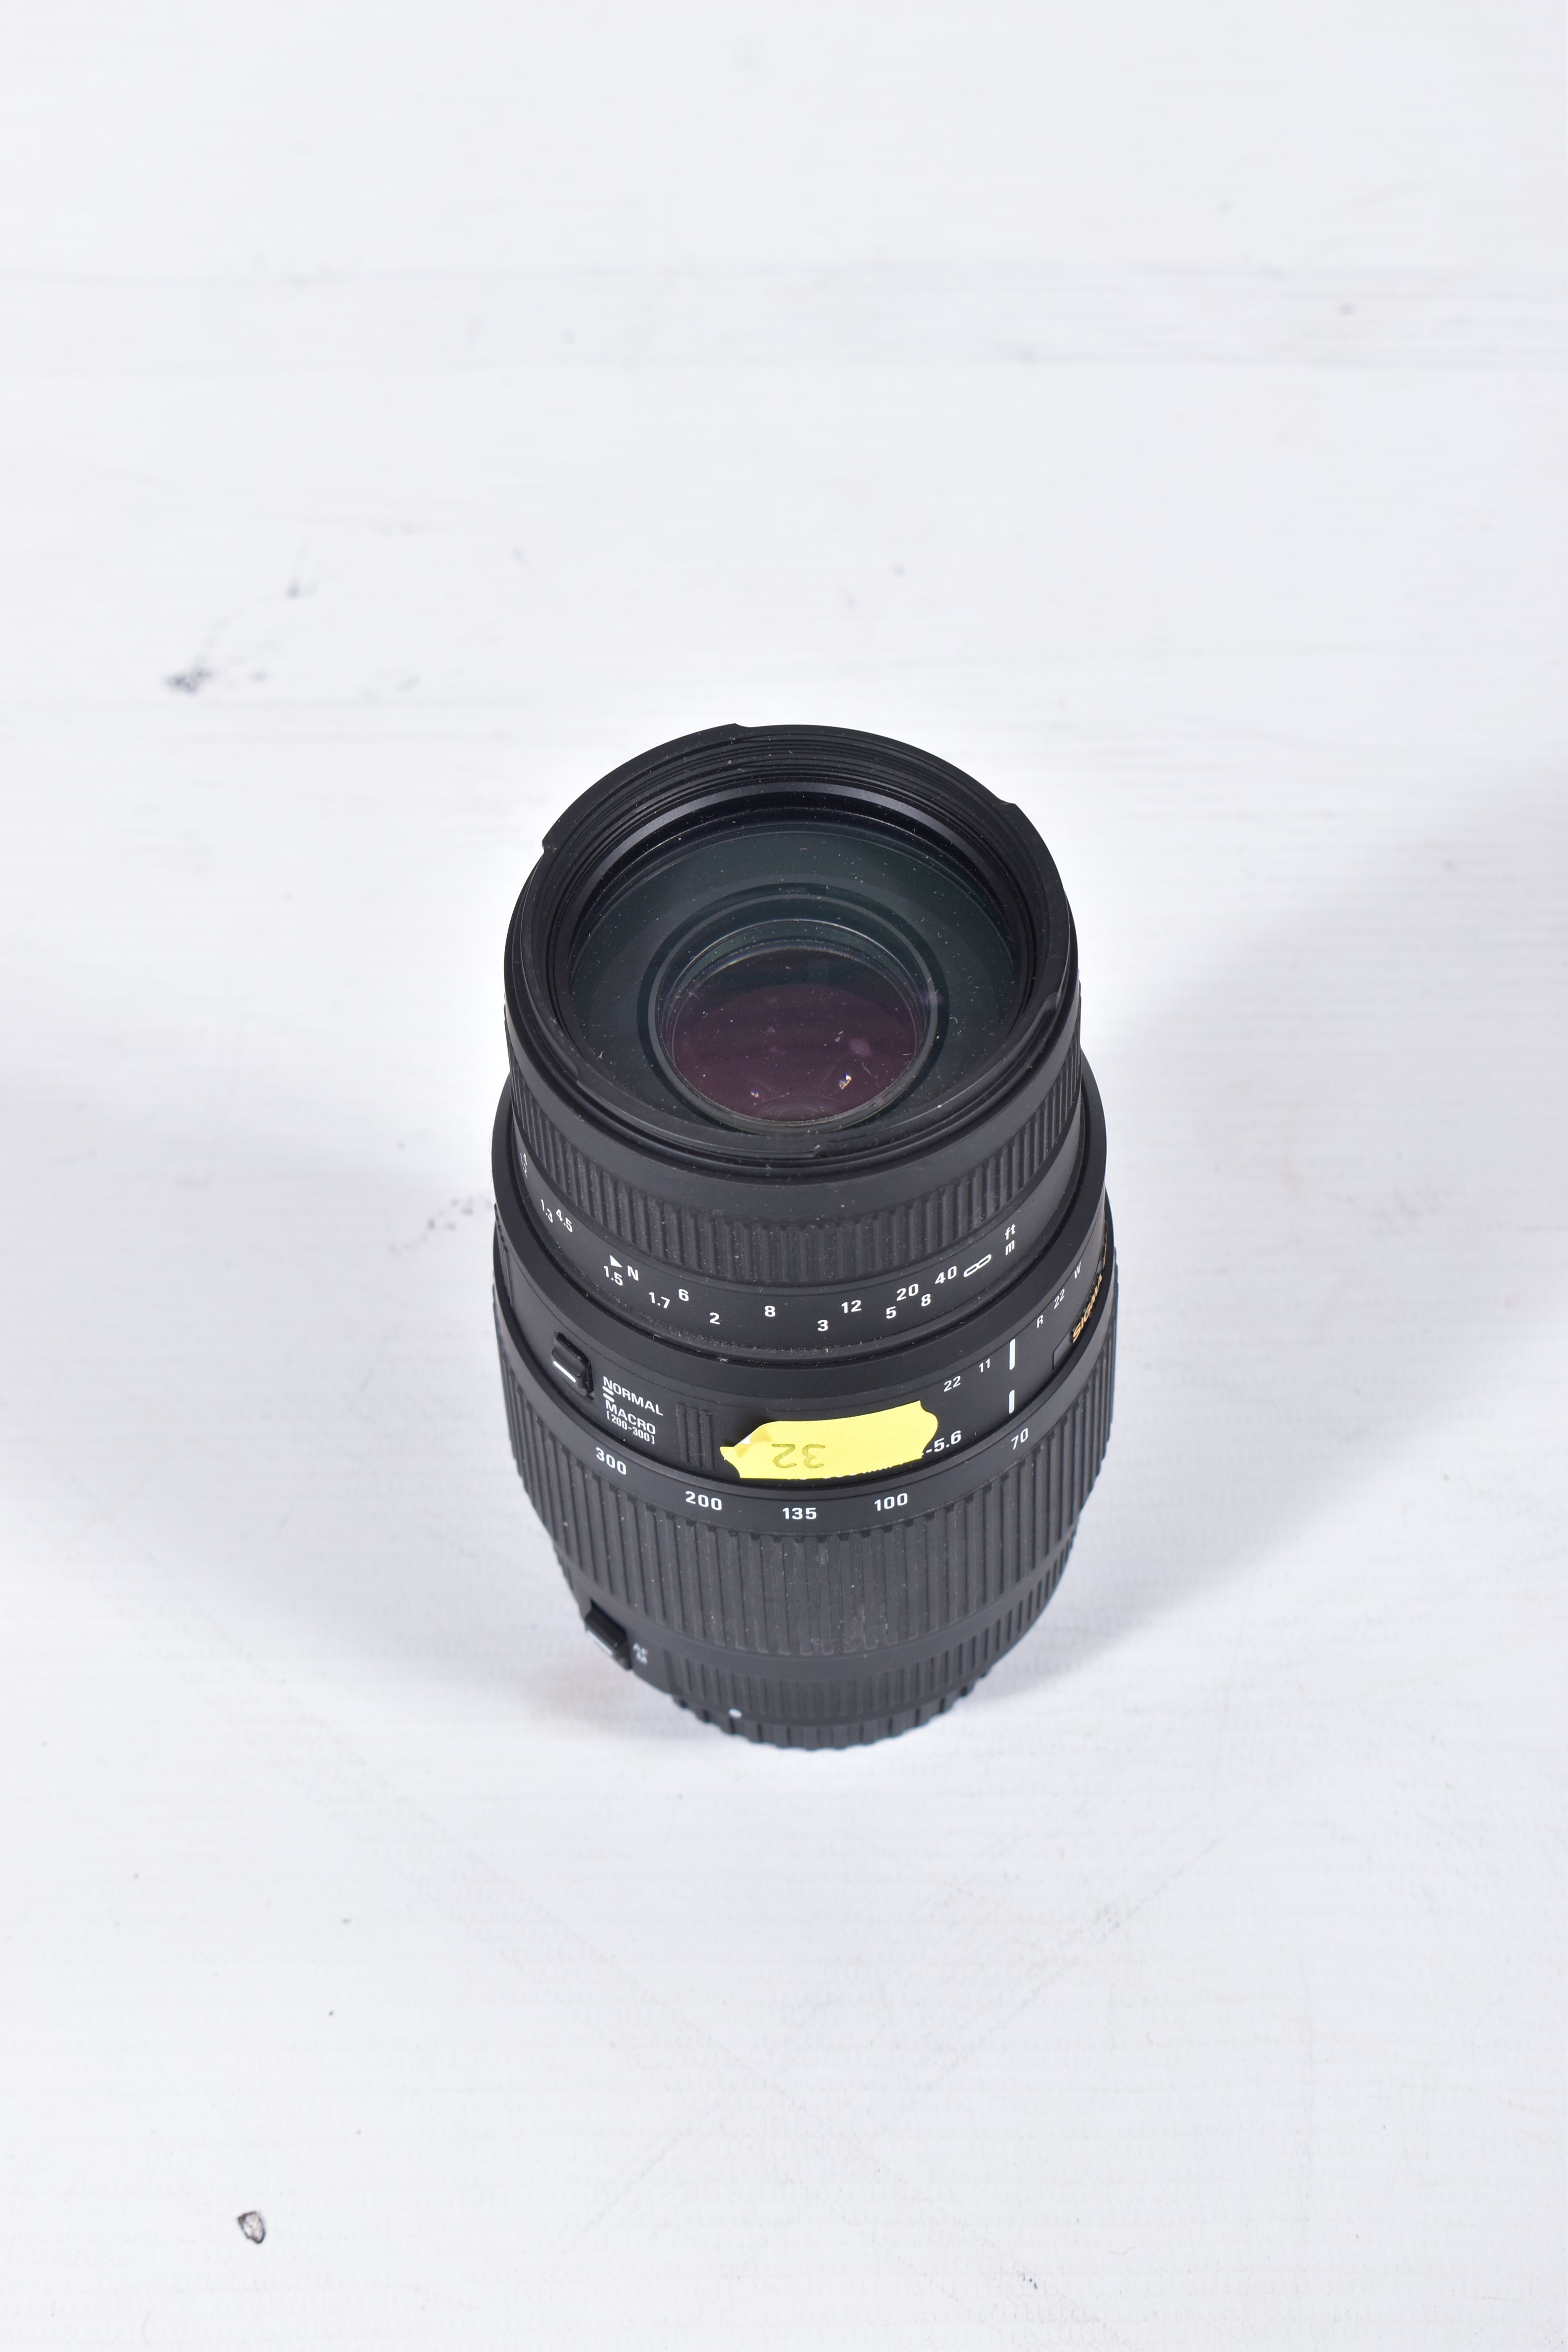 FOUR CANON AND CANON FIT ZOOM LENSES comprising of a Canon 70-300 f4 EF IS USM lens, a Sigma 70- - Image 6 of 10